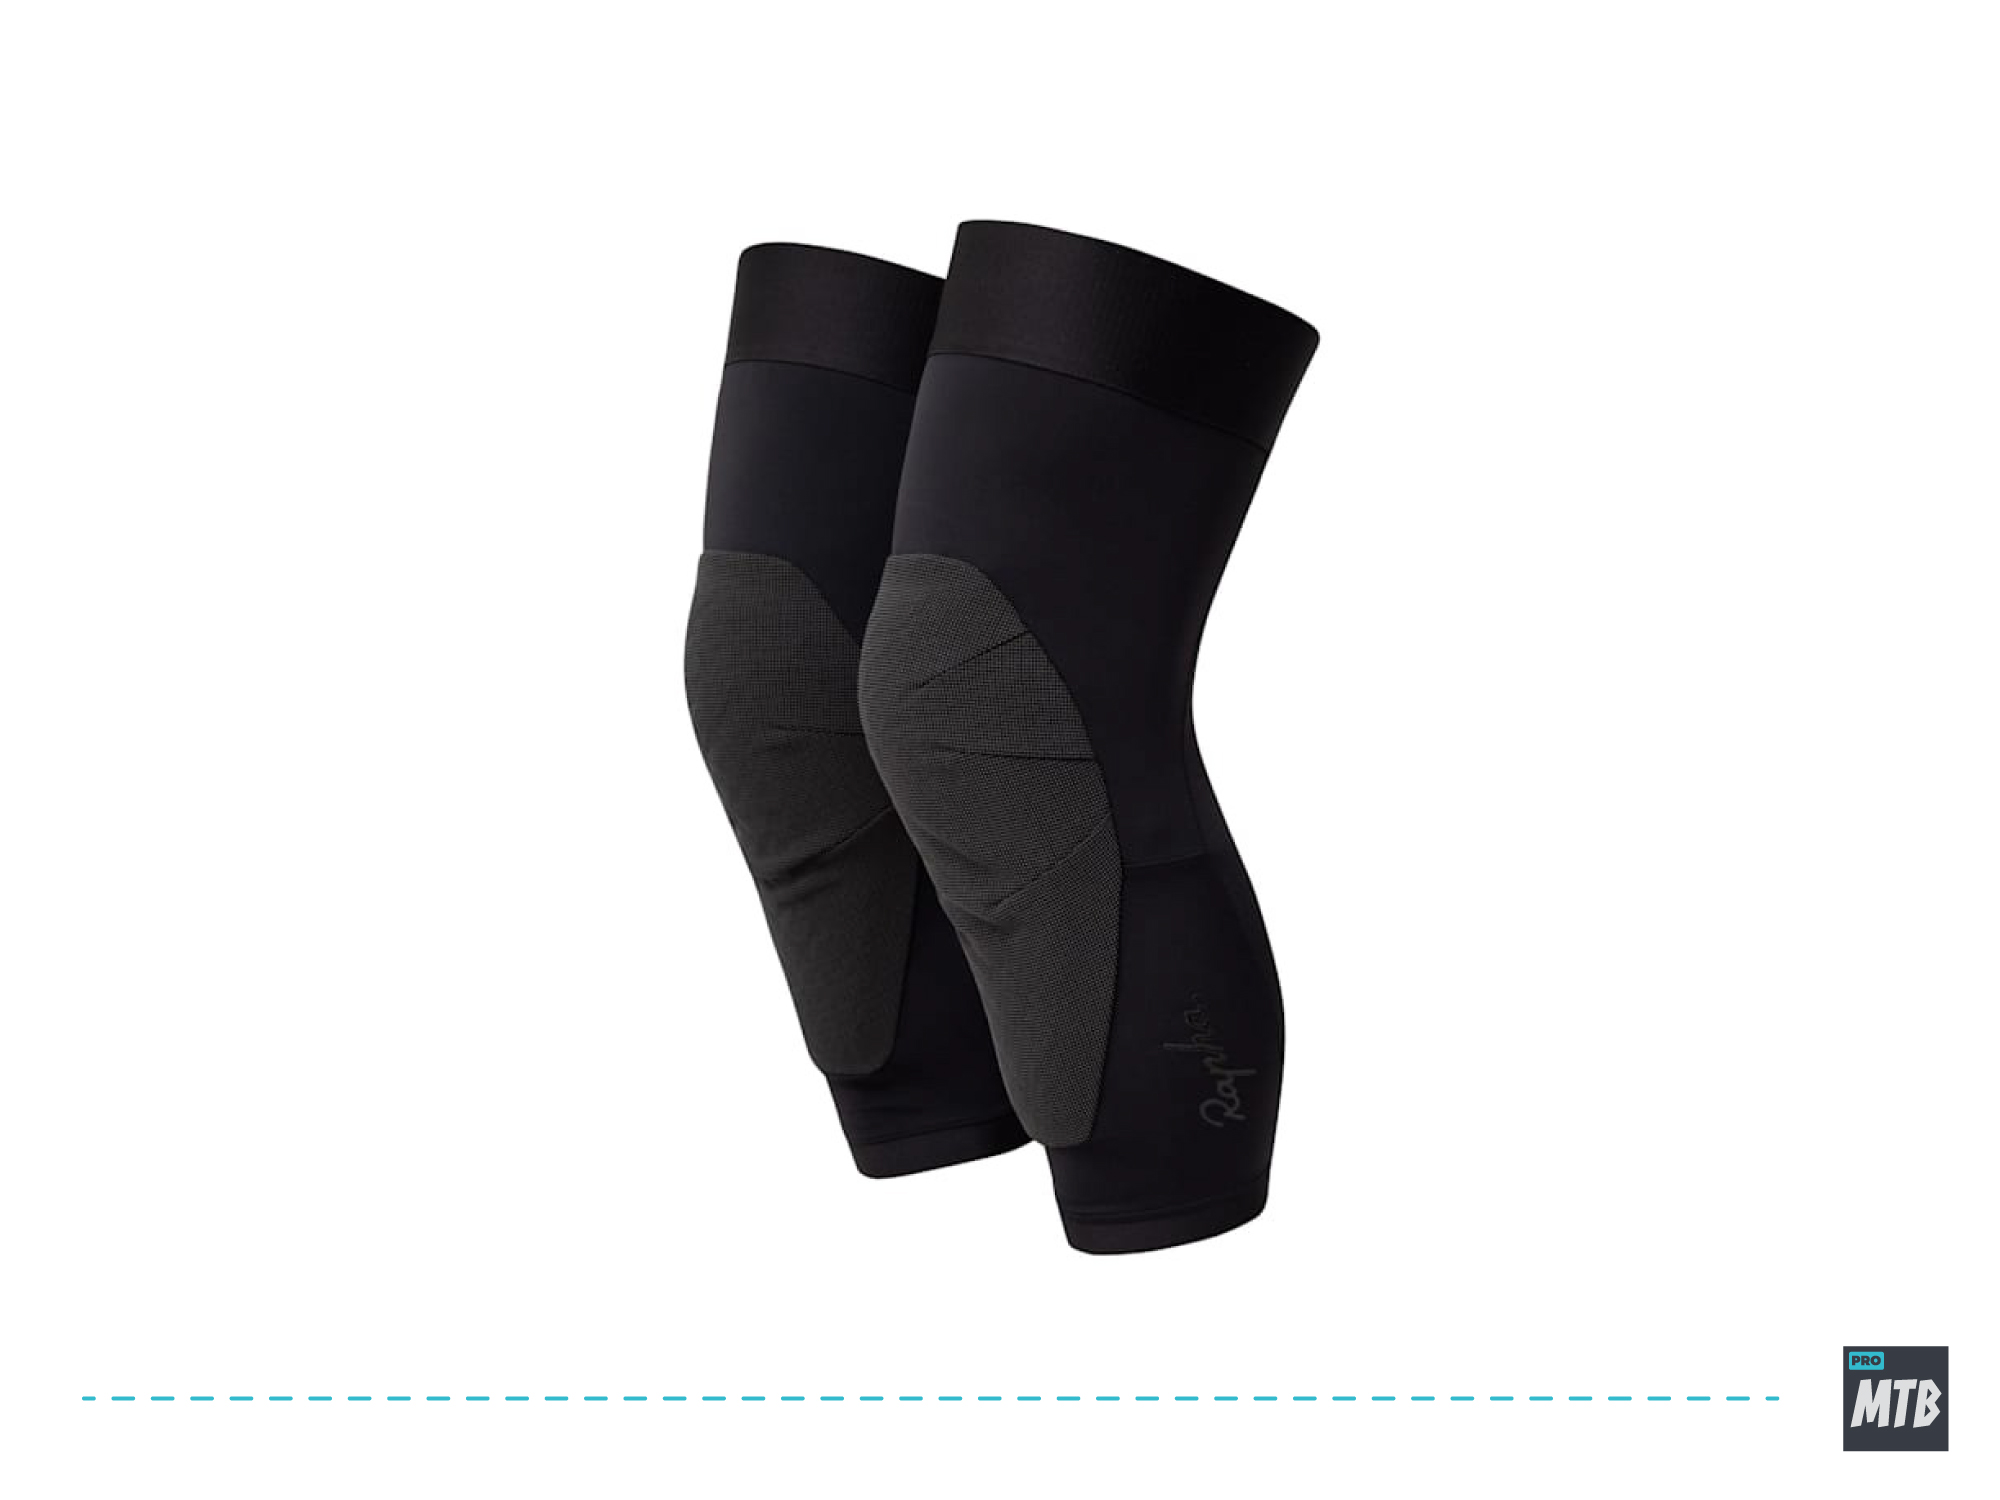 A person wearing mountain bike knee pads with closed cap